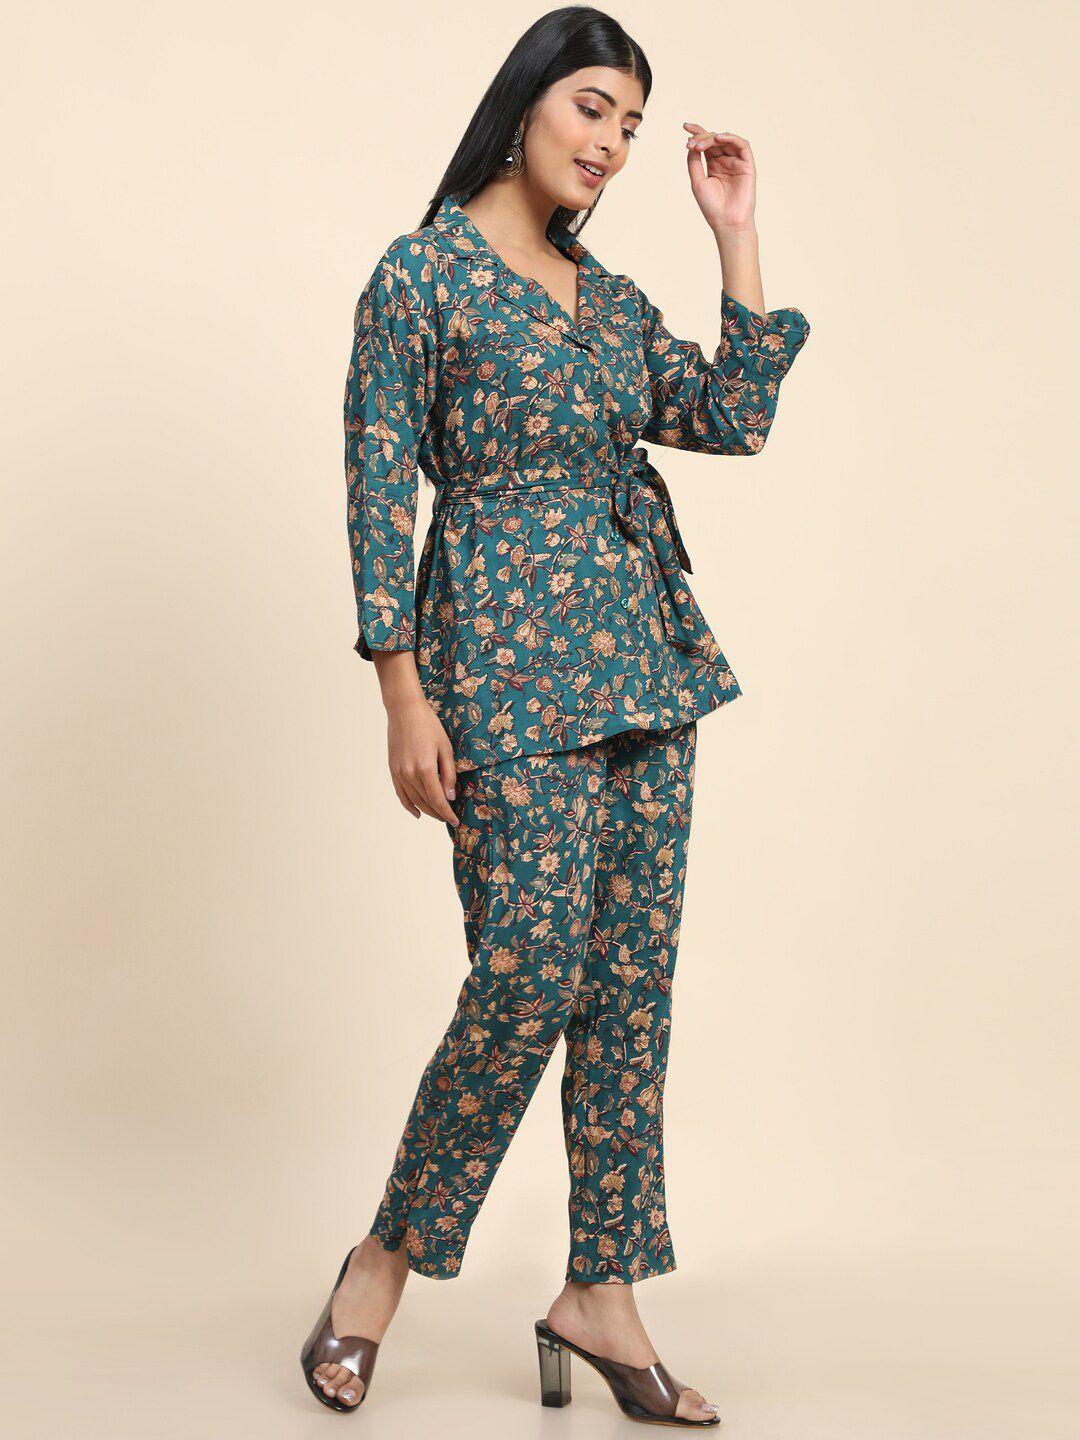 baesd floral printed lapel collar top & boot-cut wrinkle free trousers pant co-ord set